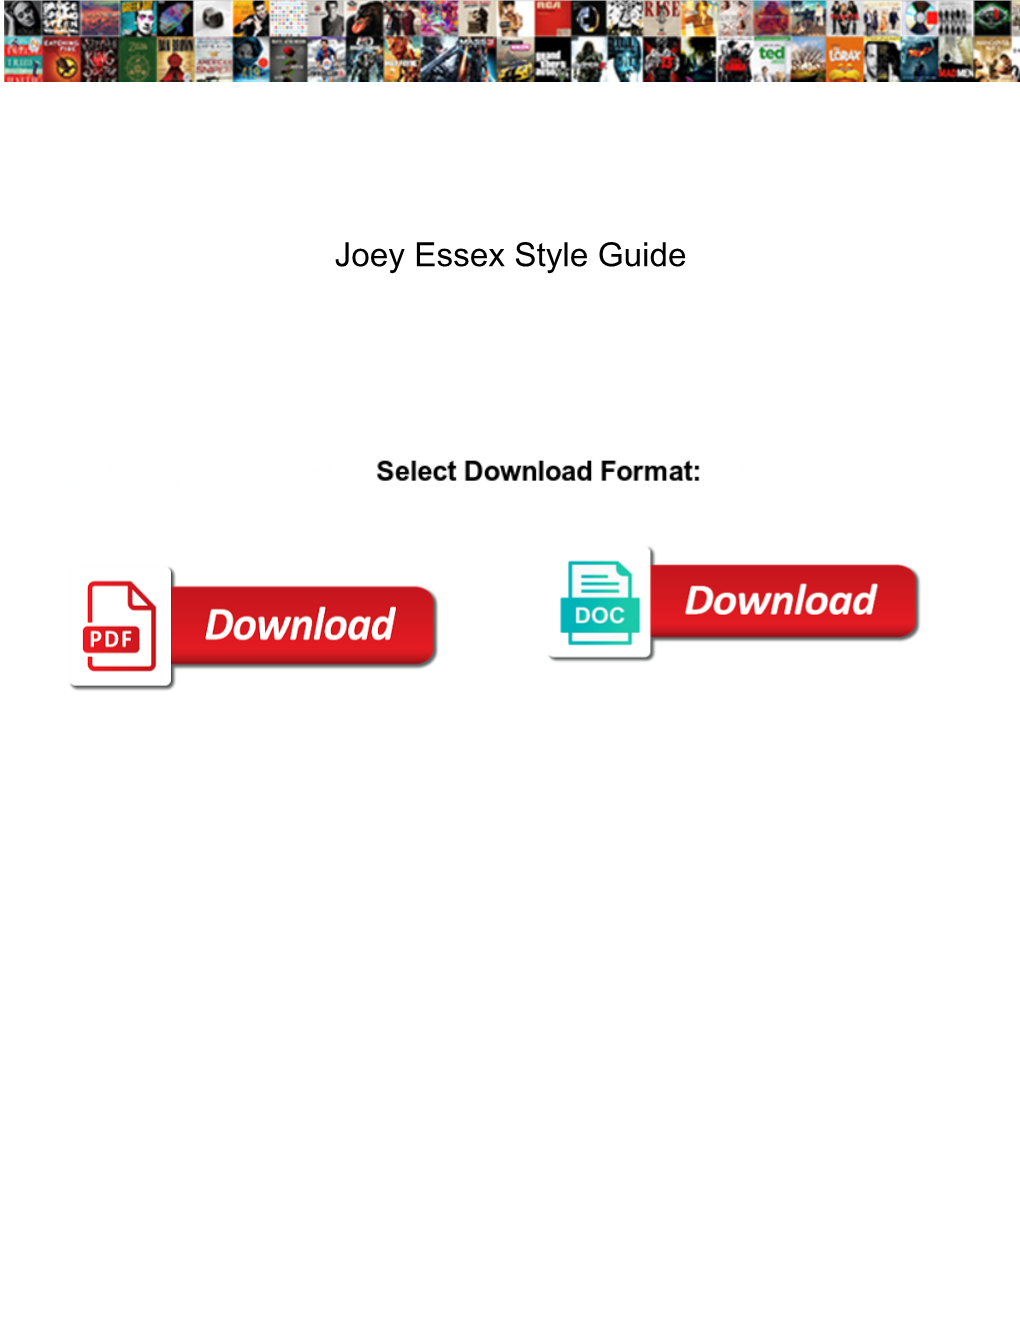 Joey Essex Style Guide